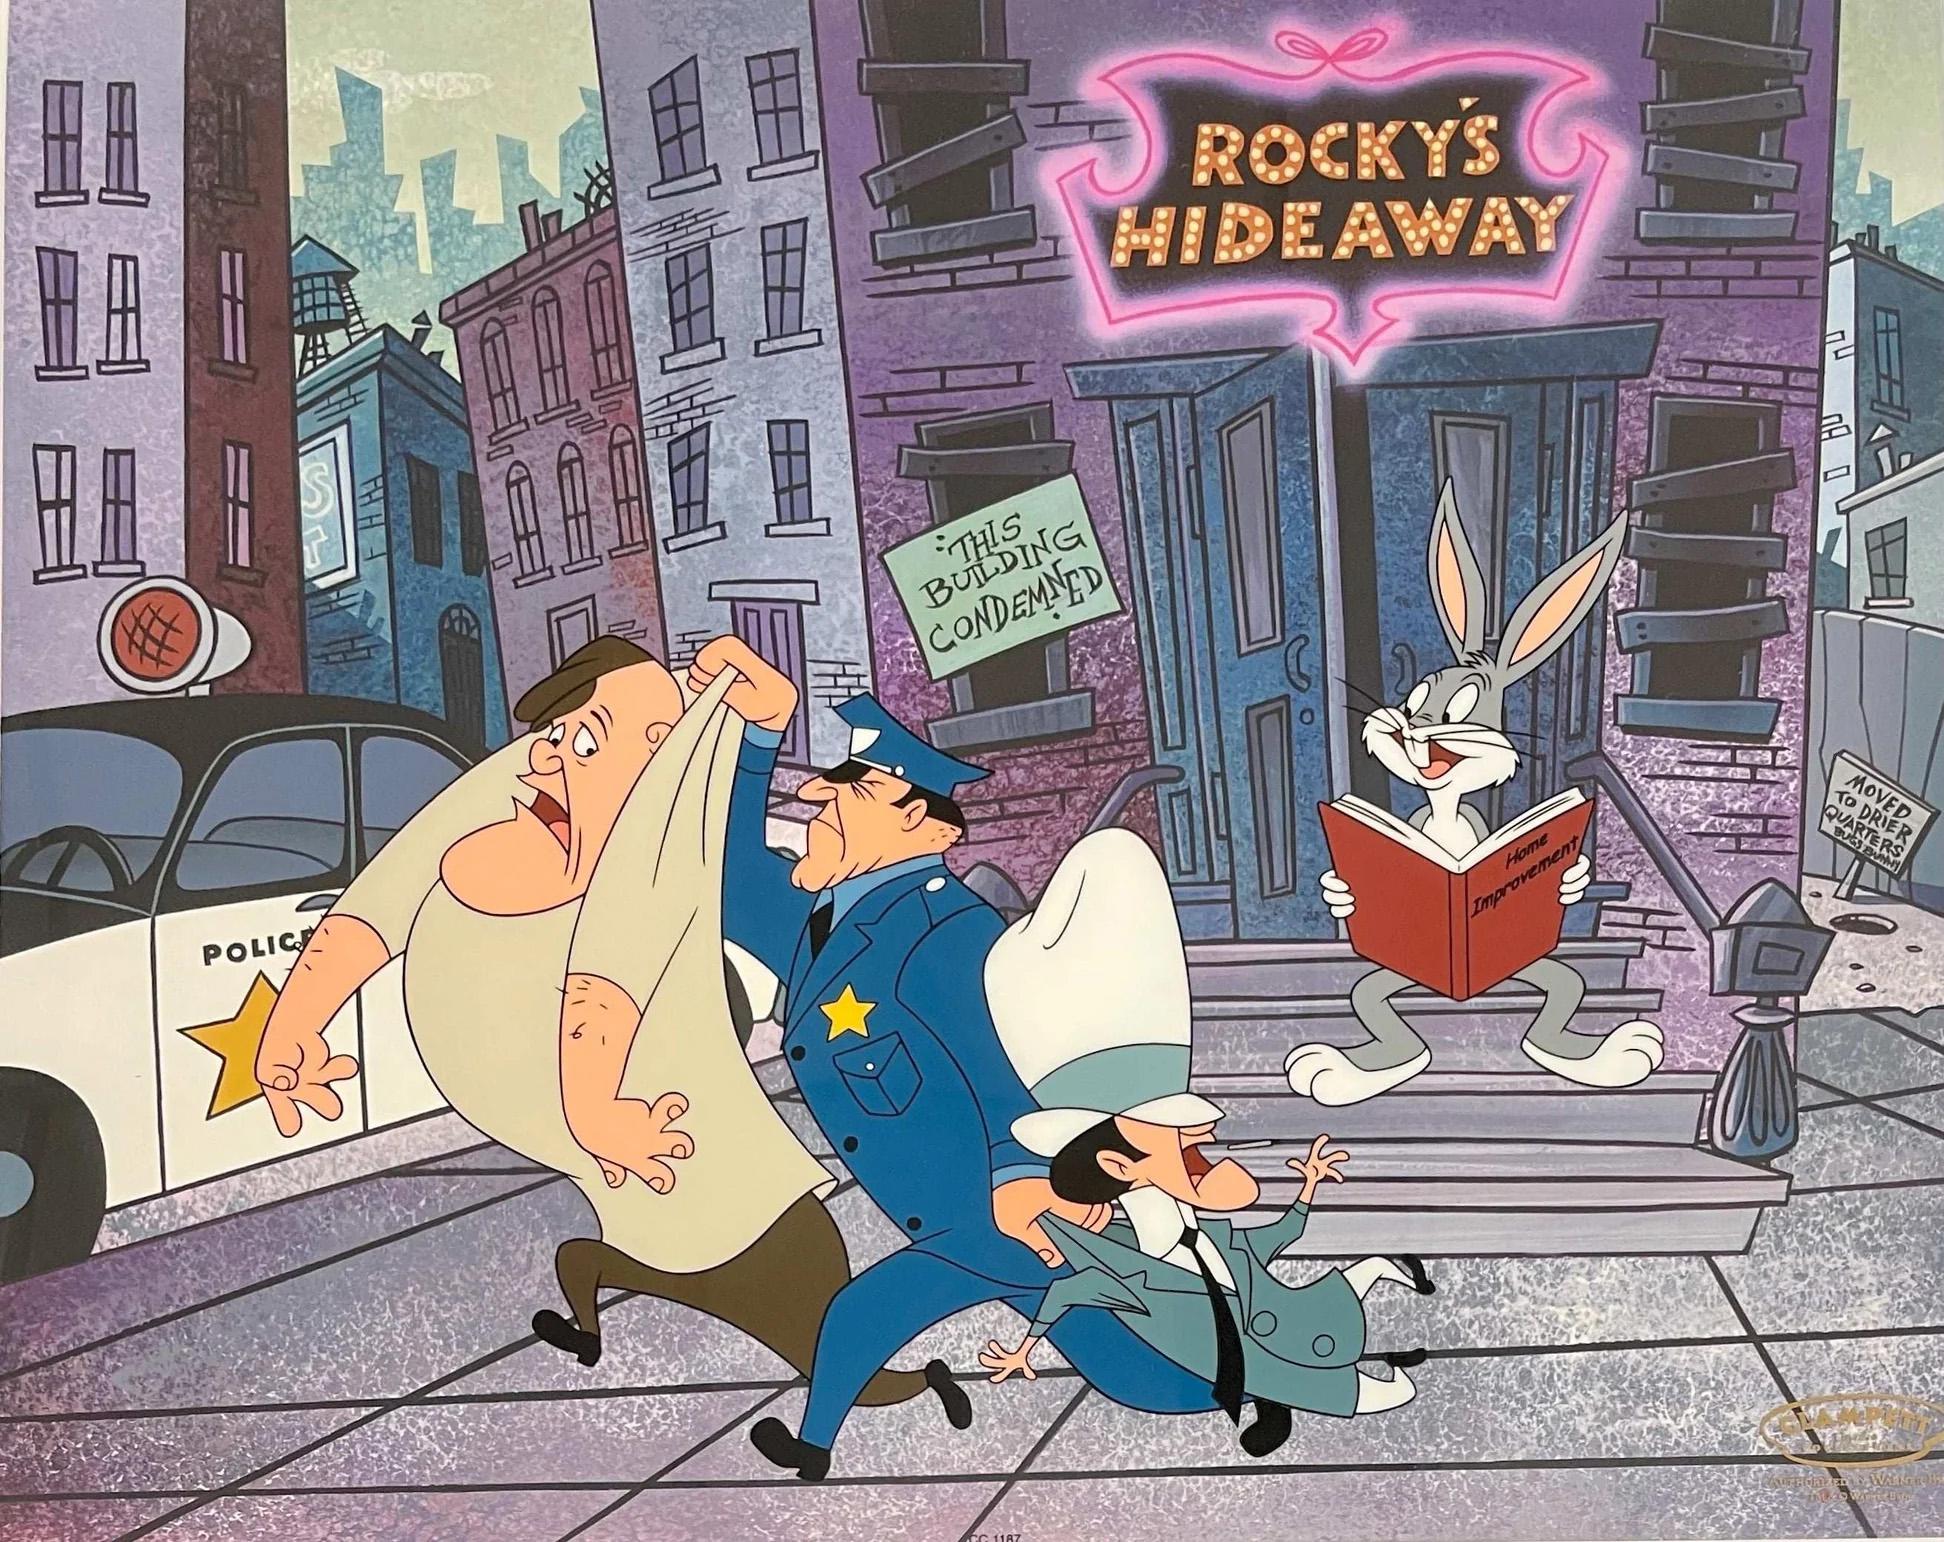 MEDIUM: Hand-painted Limited Edition Cel with Fine Art Gicleé Background
EDITION SIZE: 100 
SIZE: 13.5” x 16.5”
SKU: CC1187

Justice is served Bugs Bunny style in “Bugs’ Hideaway, once the rabbit infiltrates the mob, and takes over Rocky’s hideout.